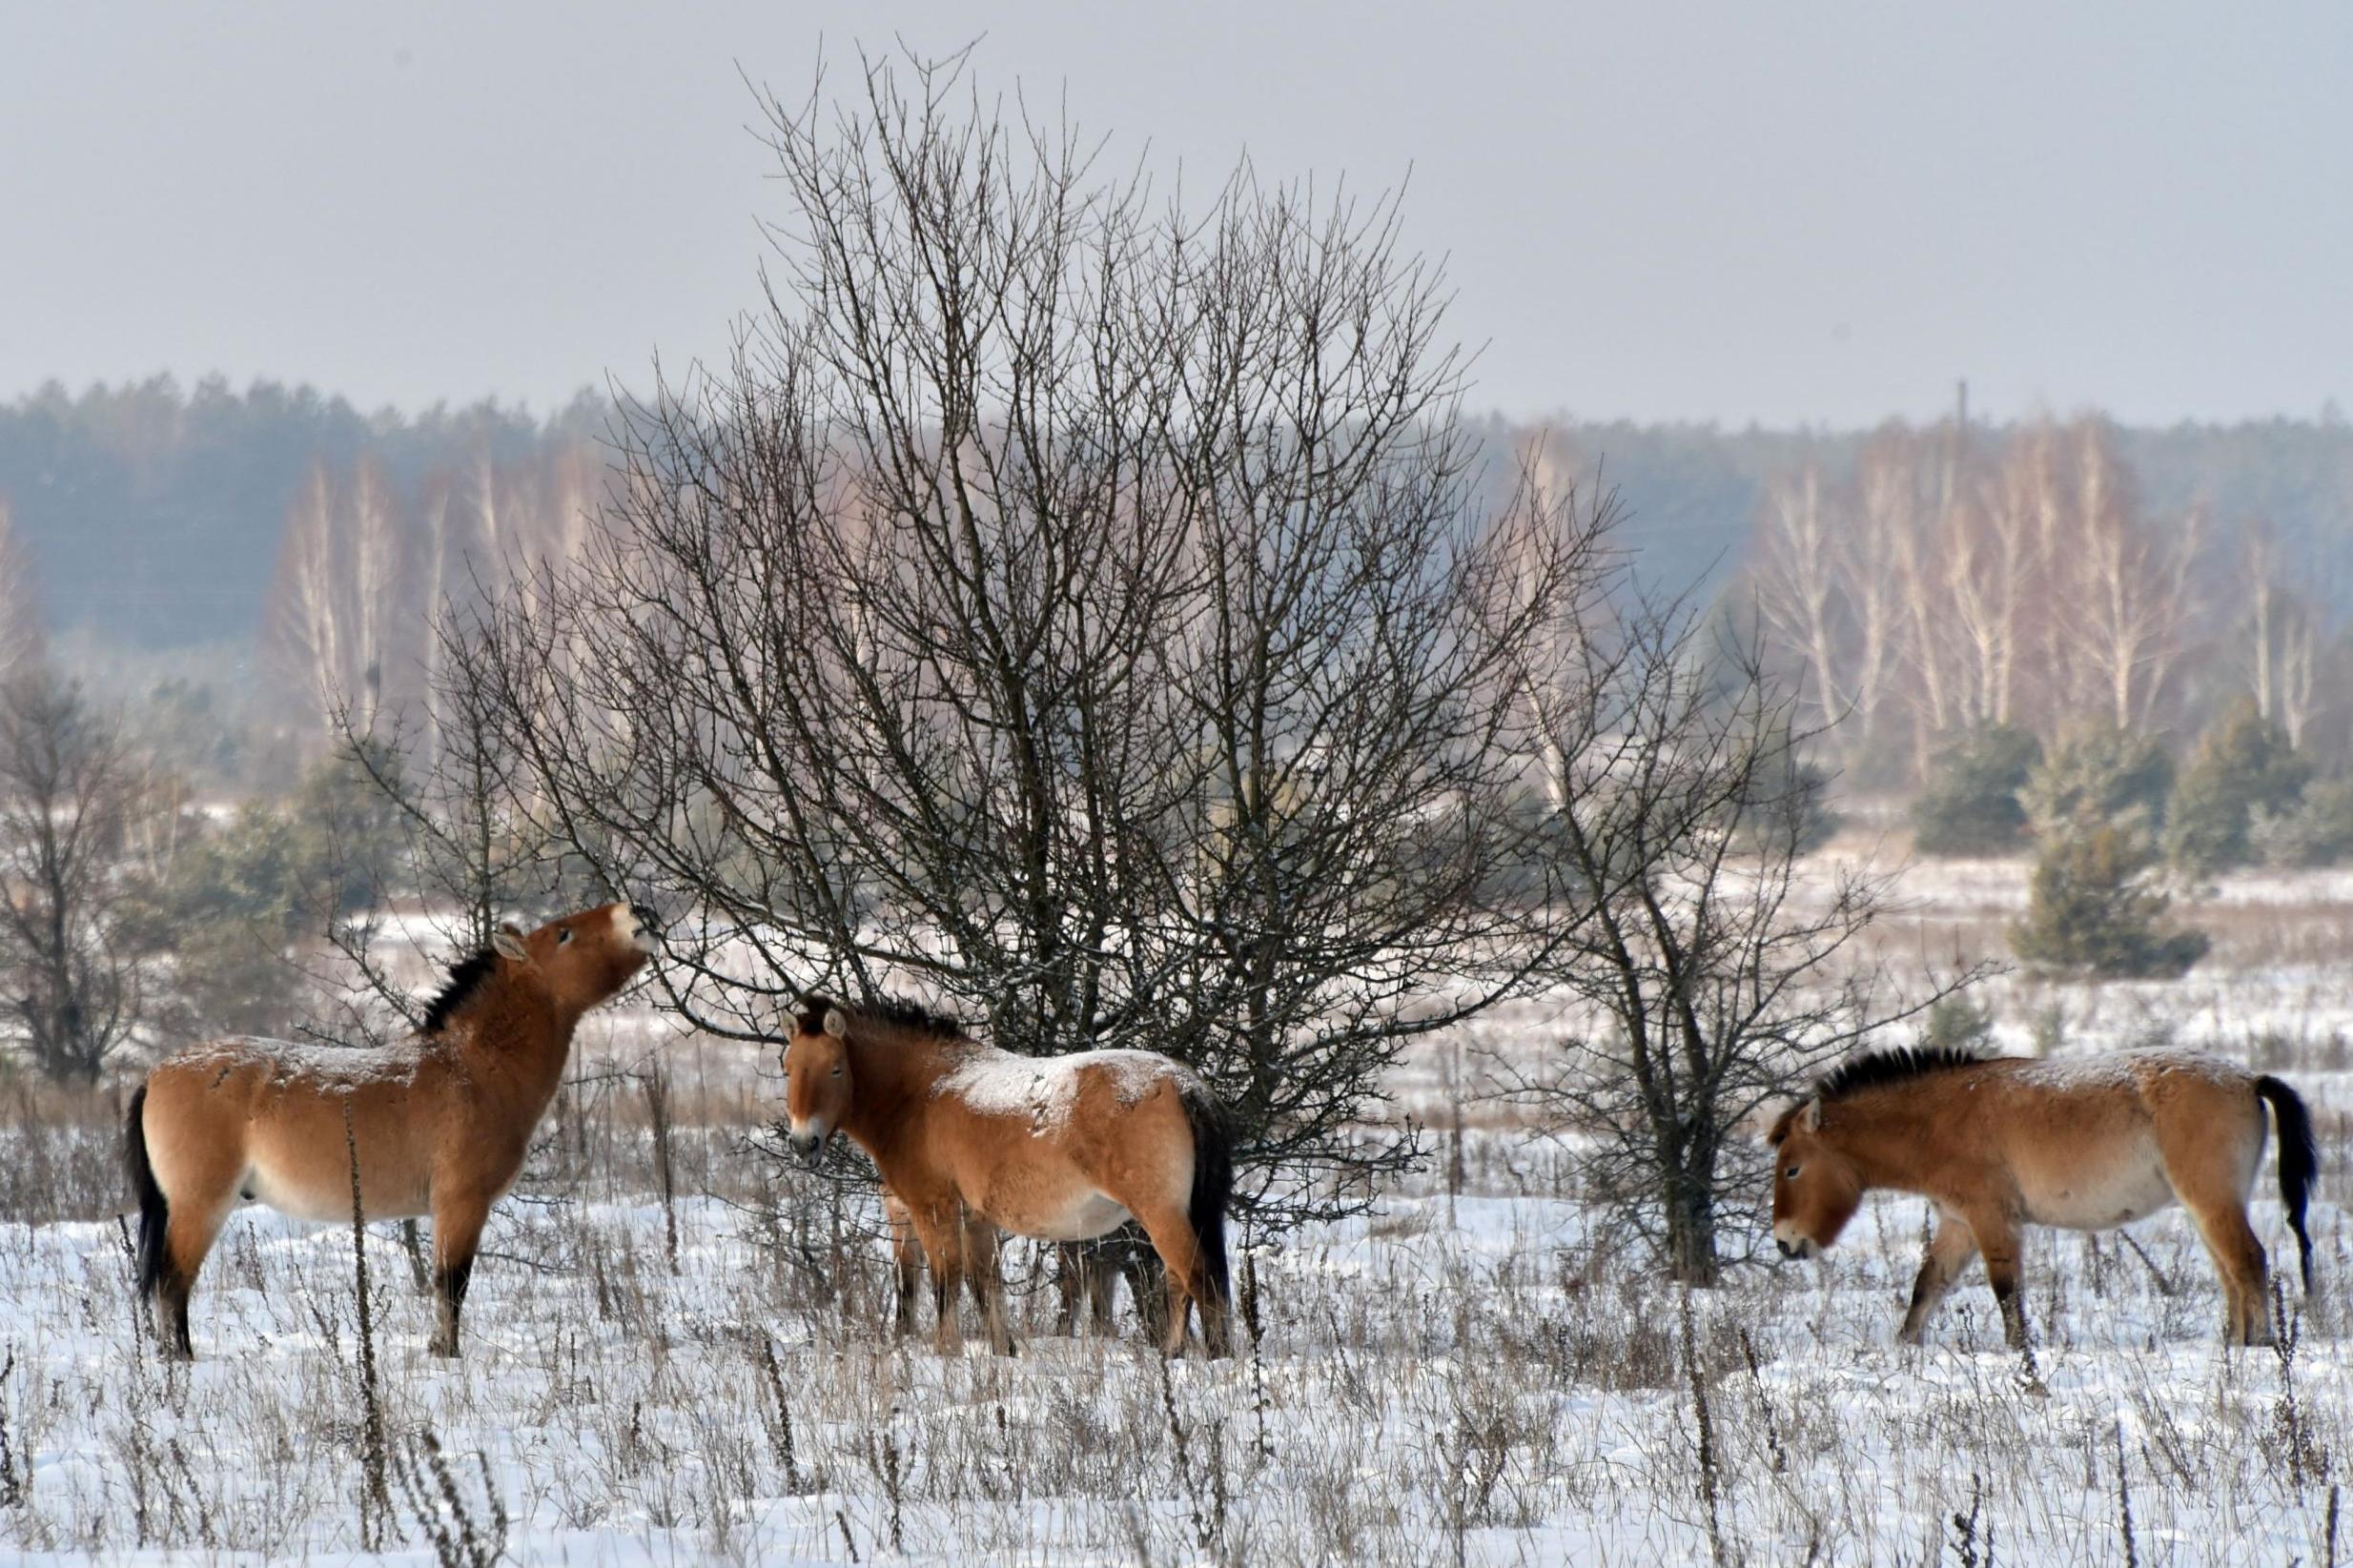 Wild Przewalski’s horses on a snow-covered field in the Chernobyl exclusions zone (AFP/Getty)